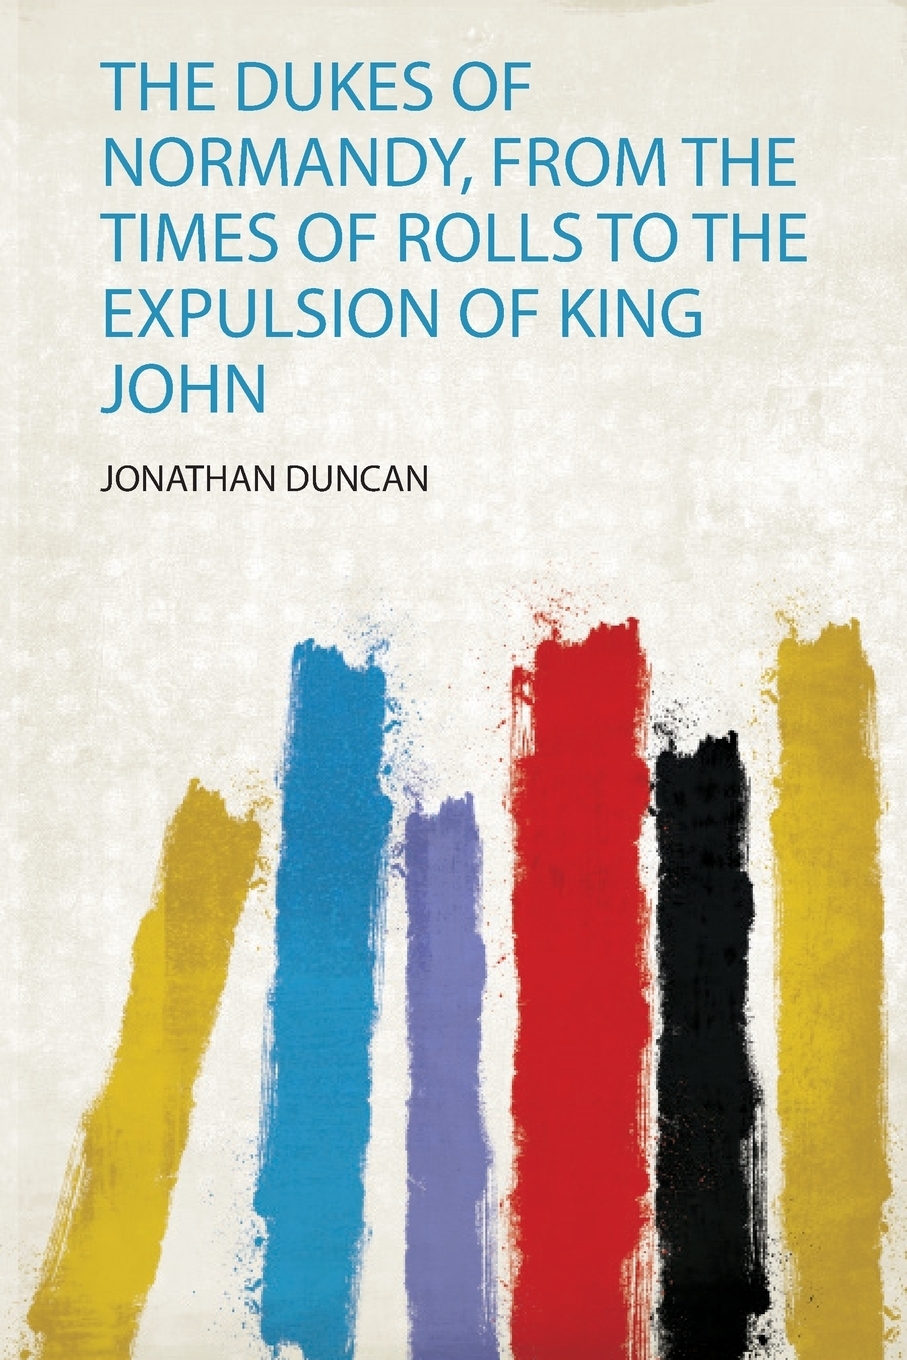 The Dukes of Normandy, from the Times of Rolls to the Expulsion of King John